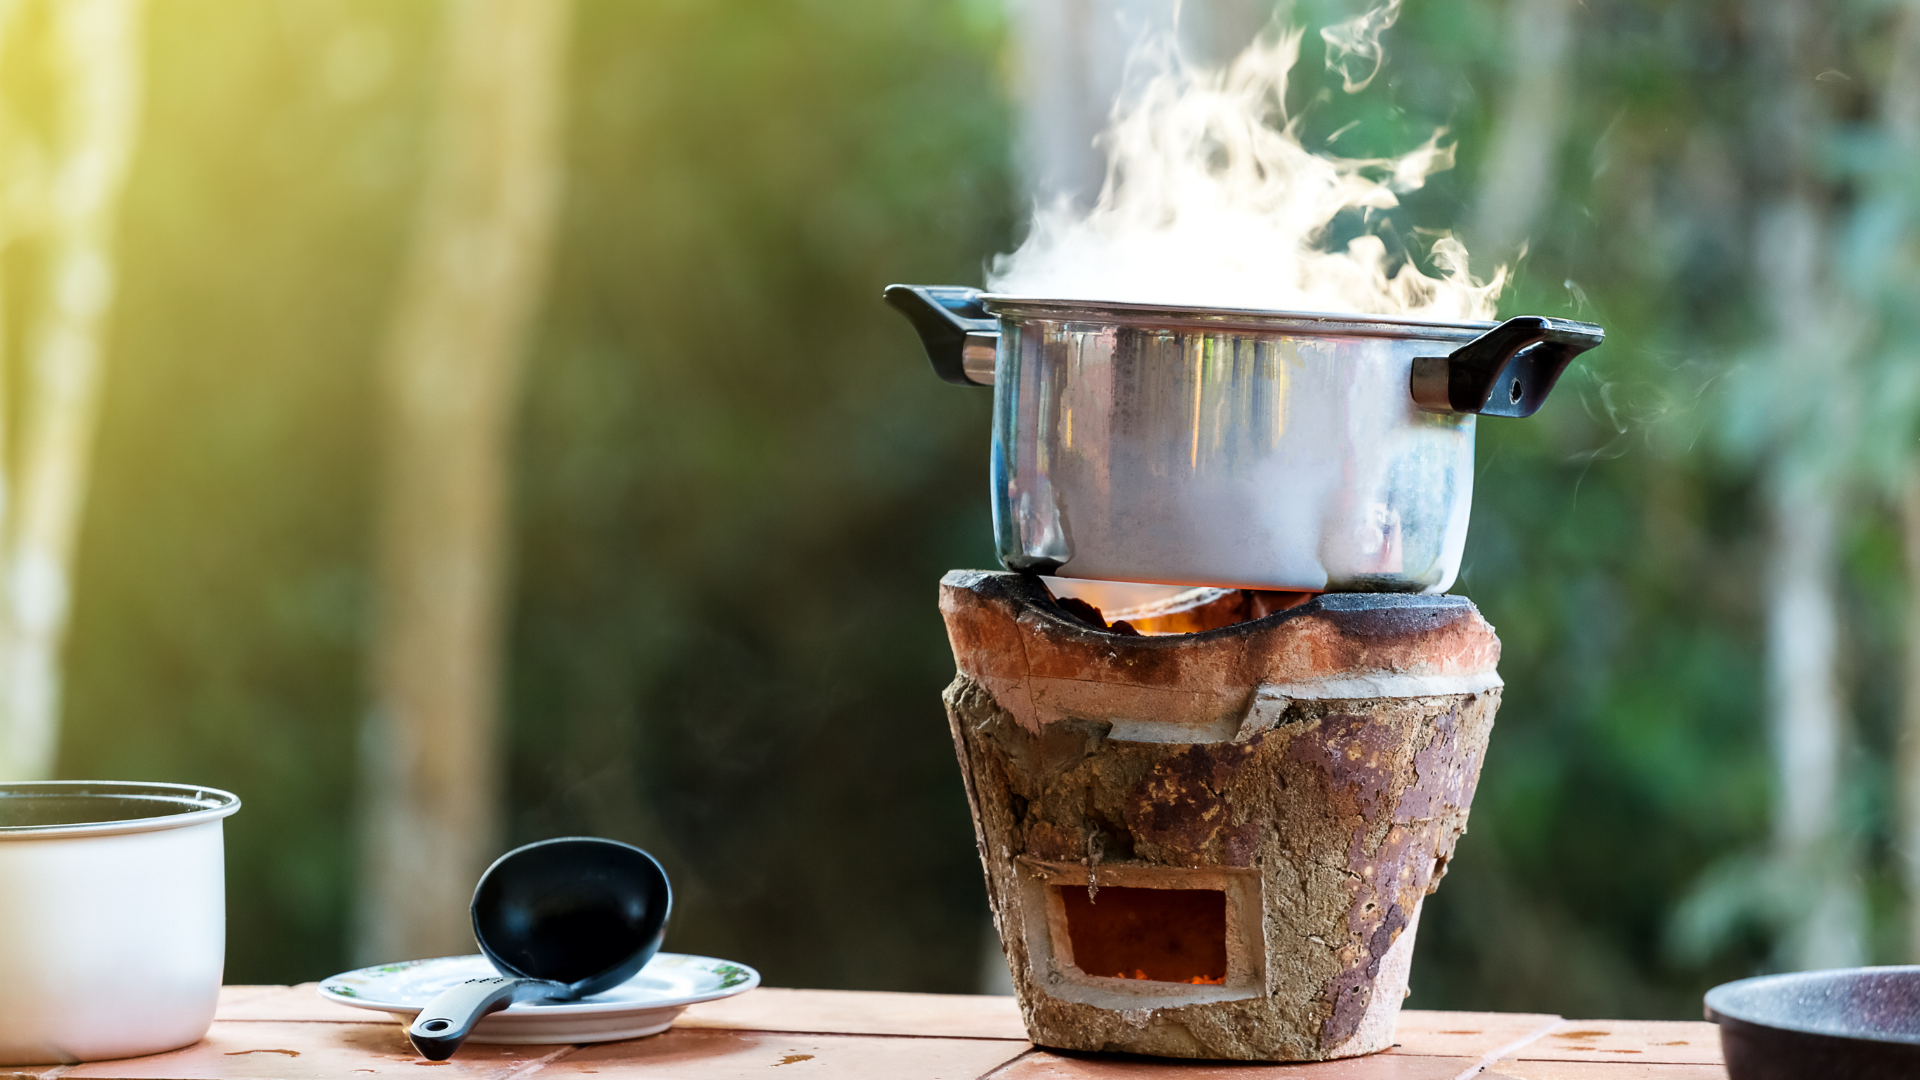 soup warming on top of pot outside holistic skincare company office